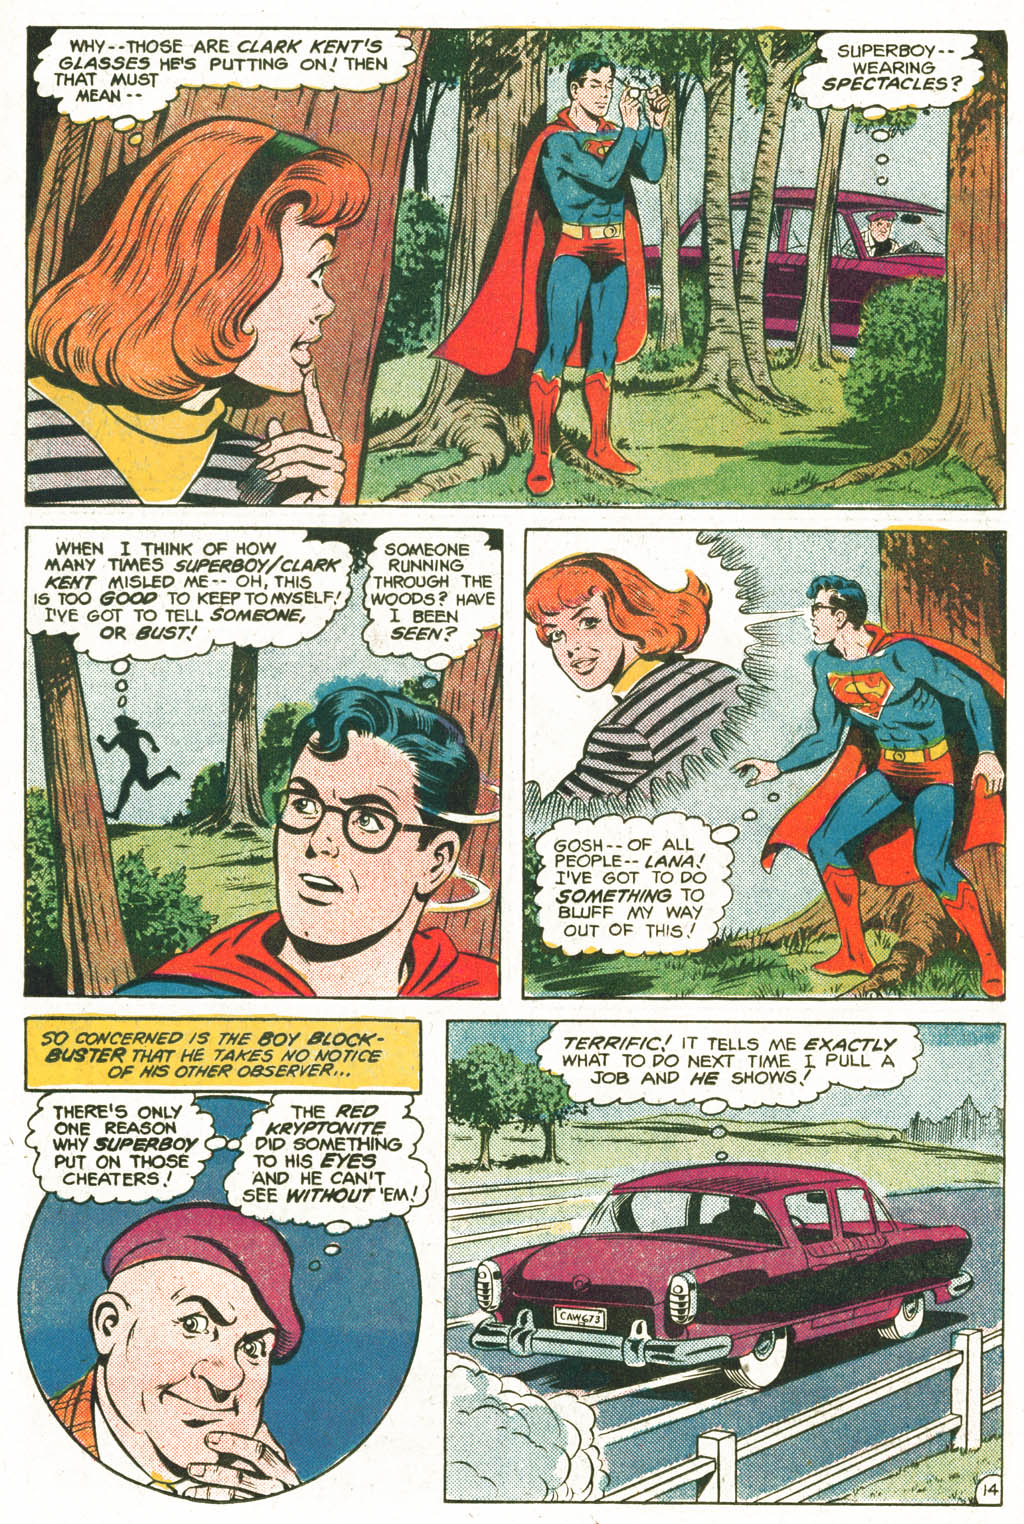 The New Adventures of Superboy 24 Page 14